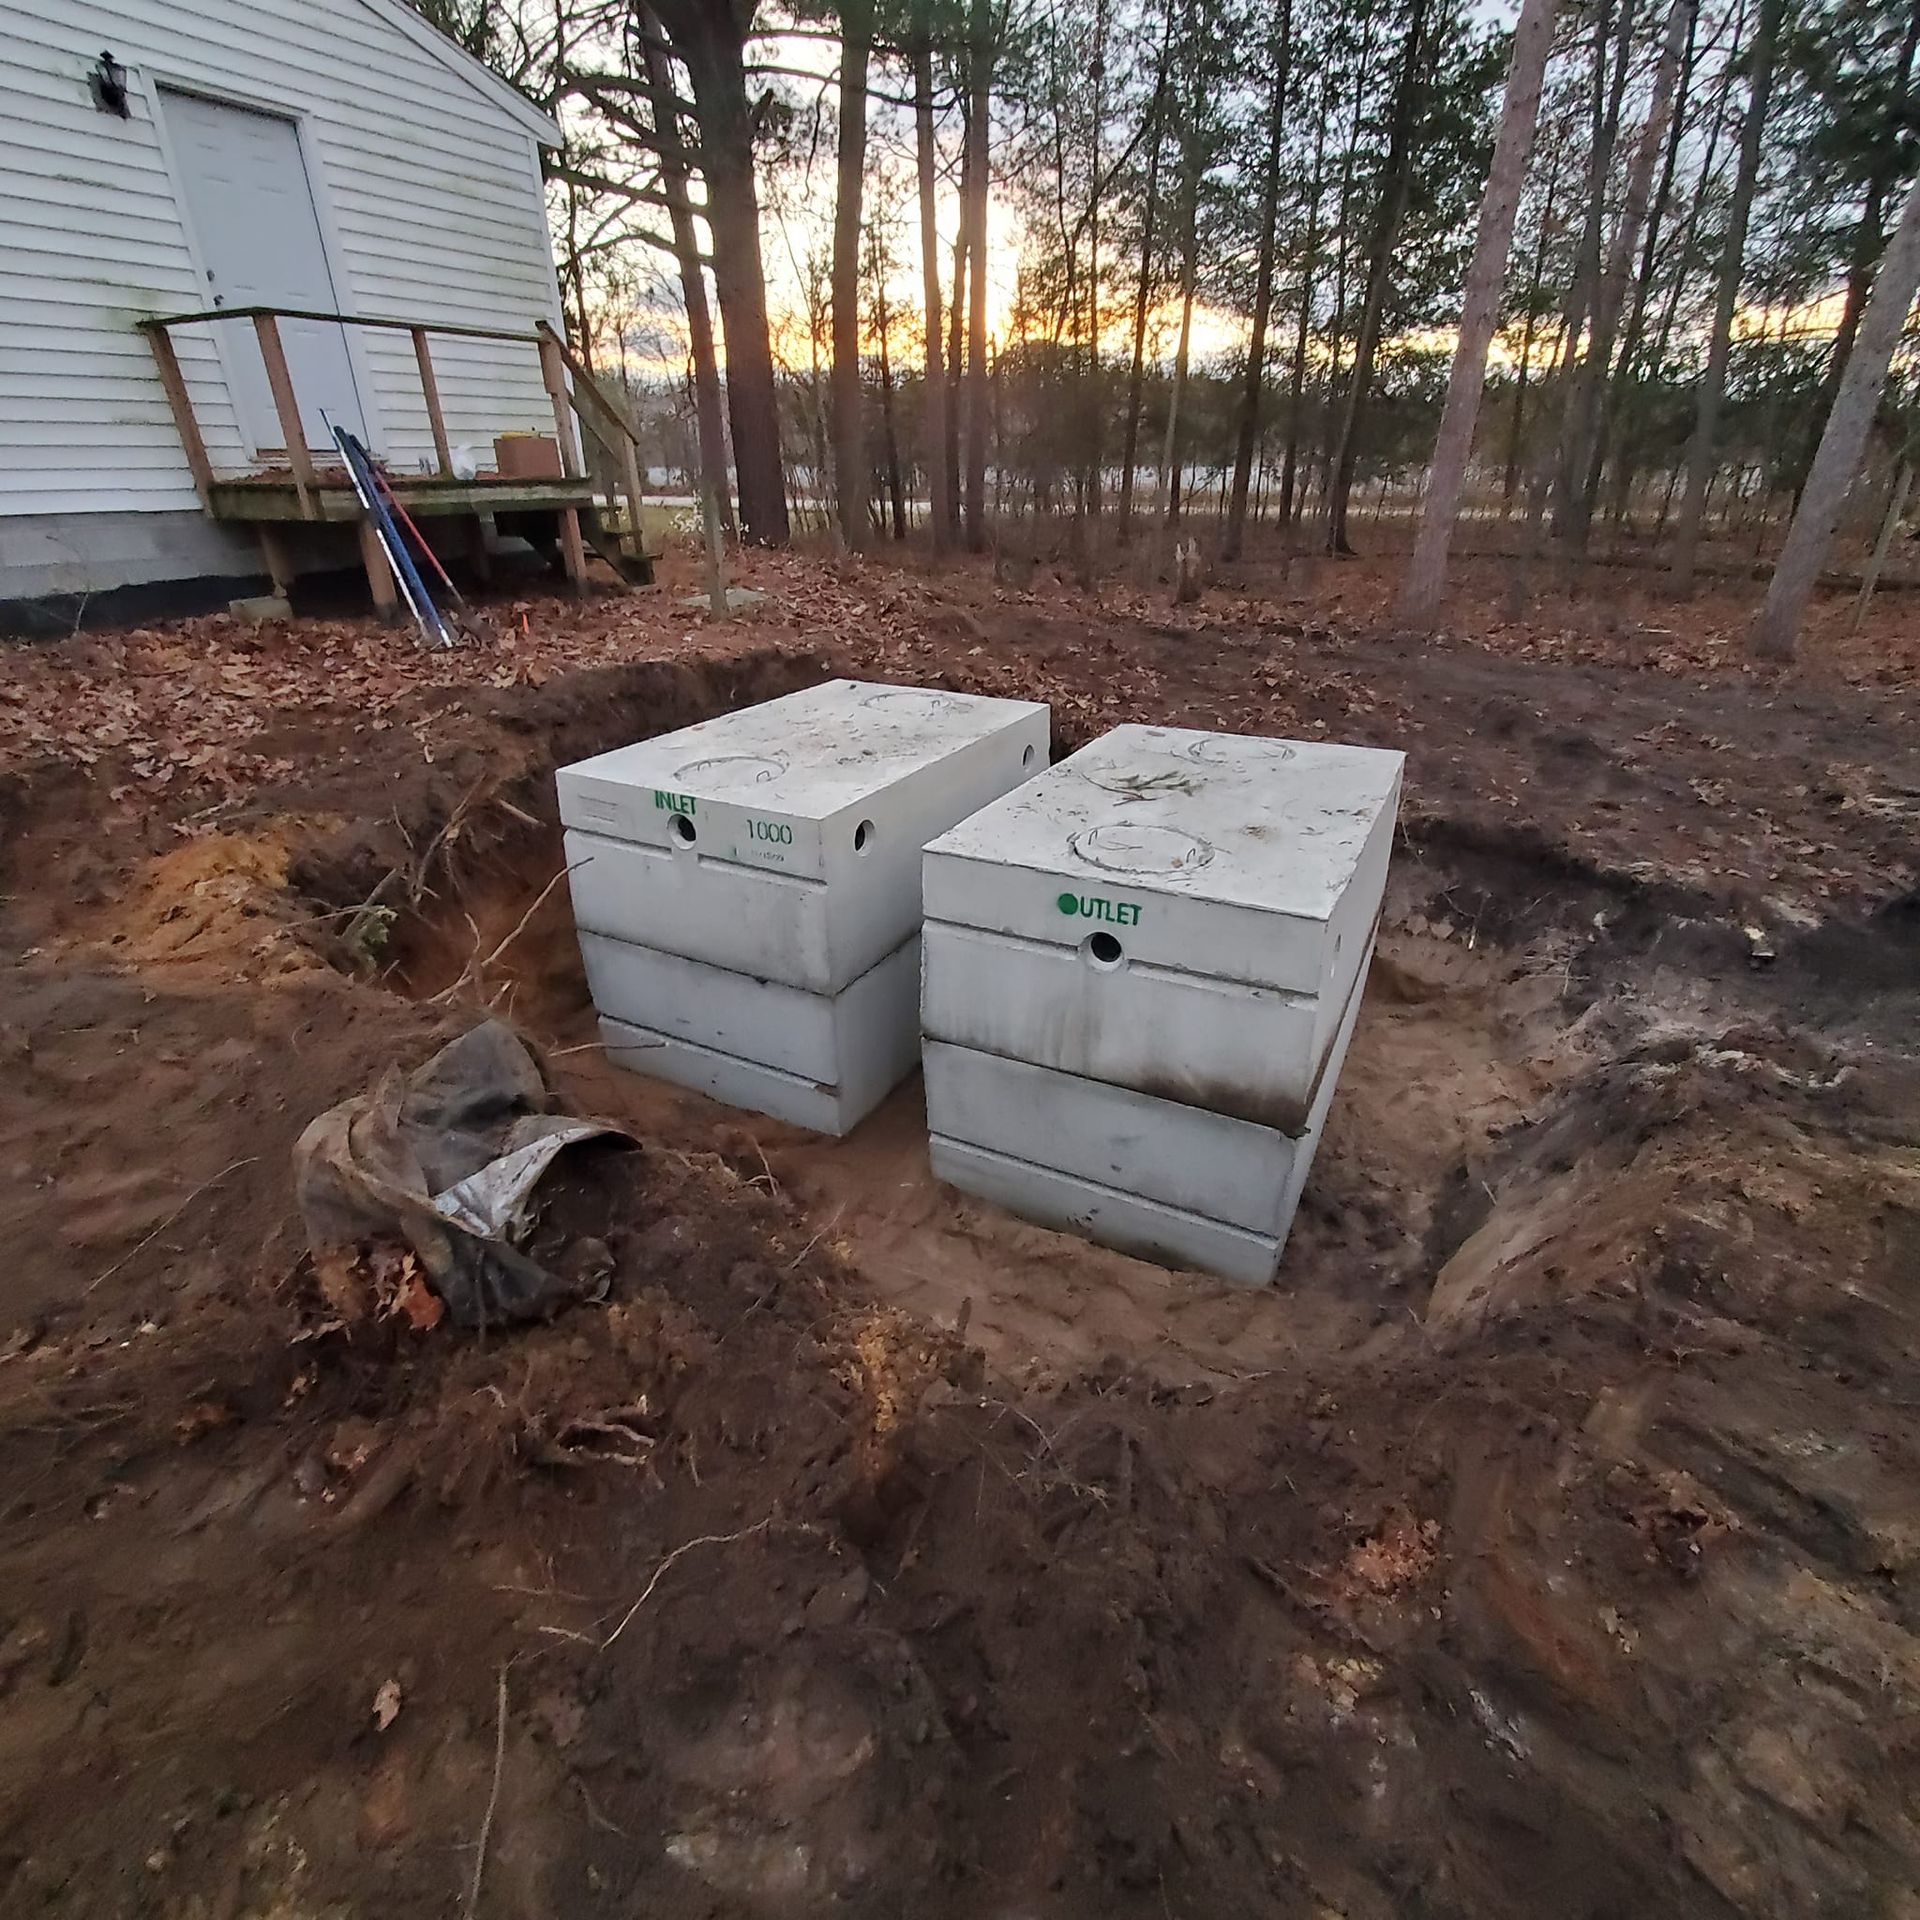 two septic tanks are sitting in the dirt in front of a house